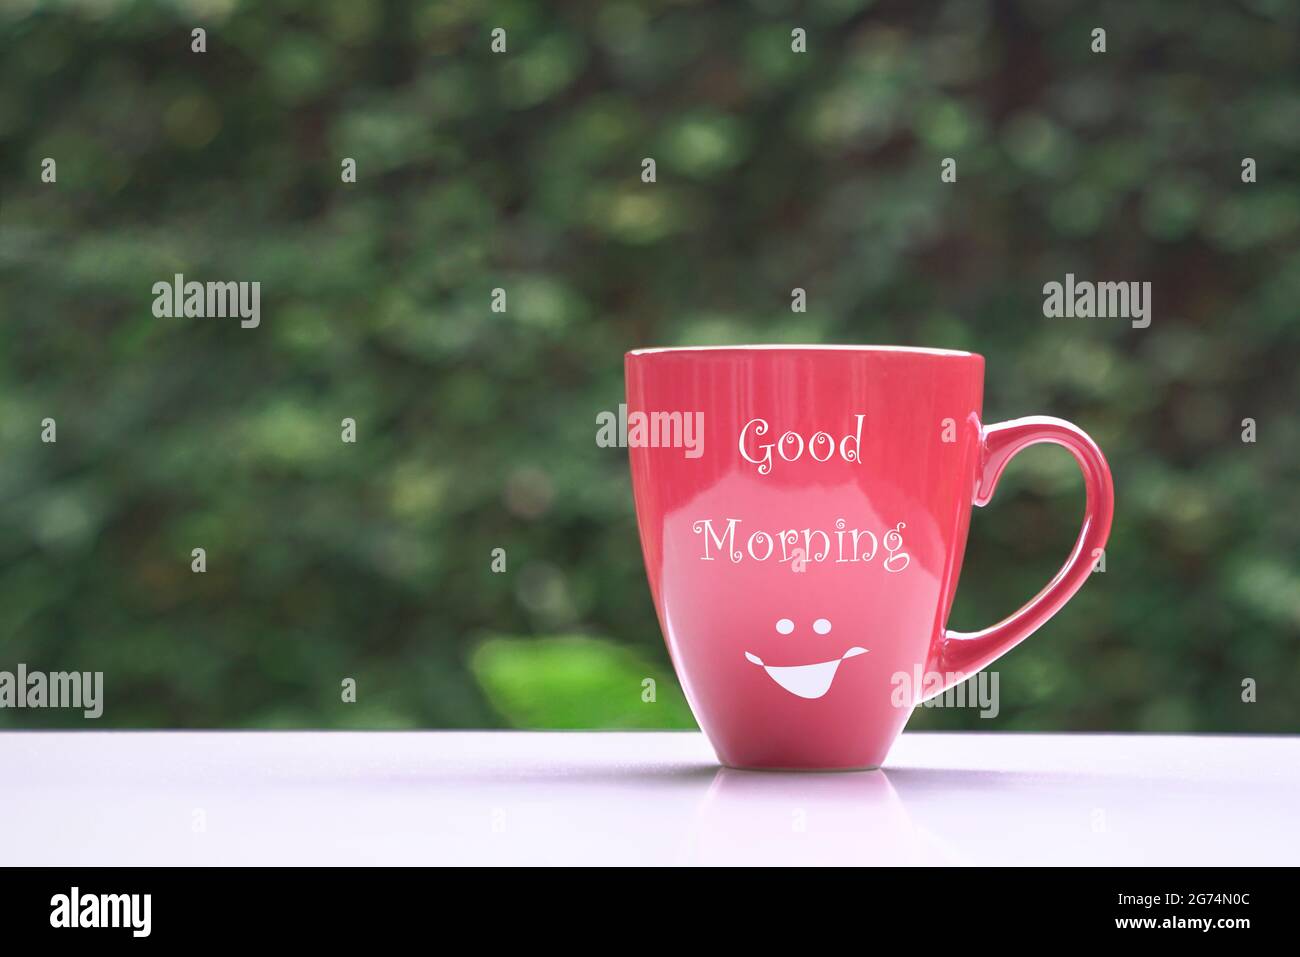 images of good morning wishes with coffee